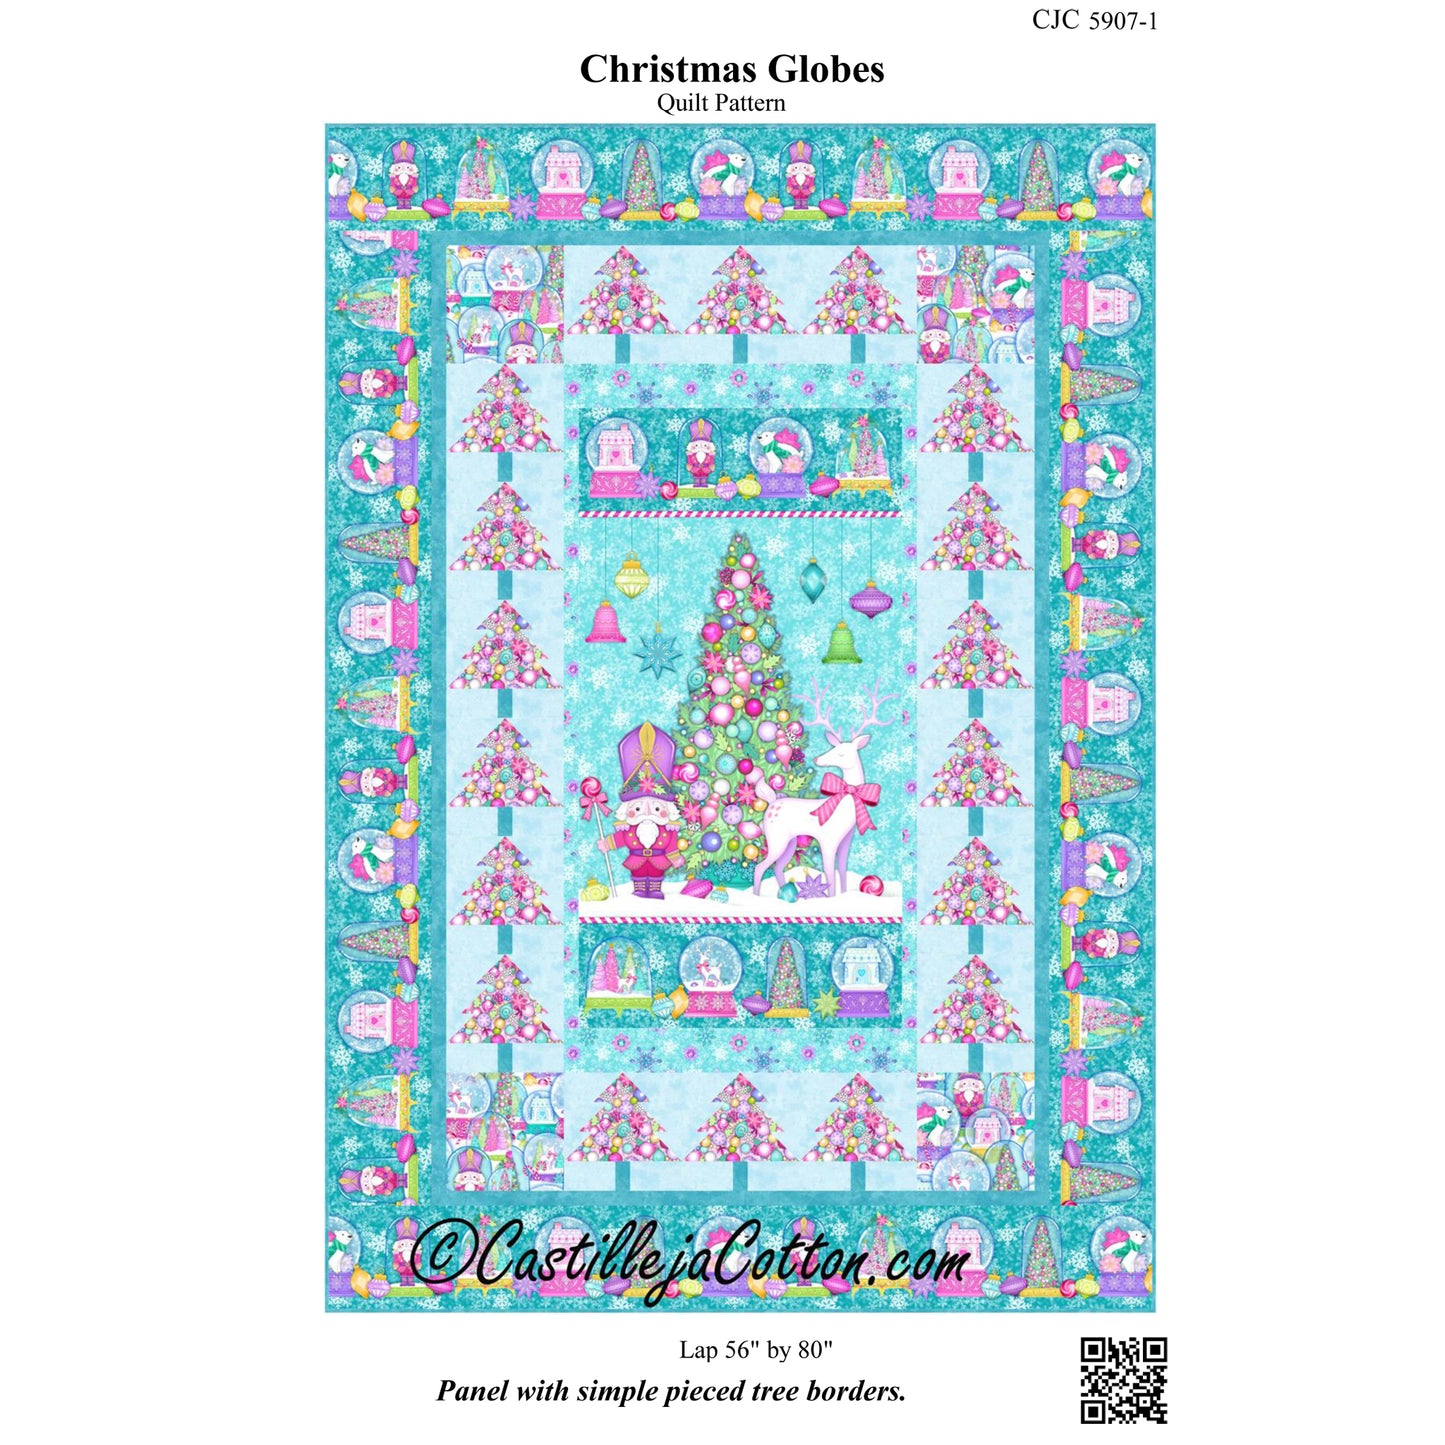 Cover image of pattern for Christmas Globes Quilt.